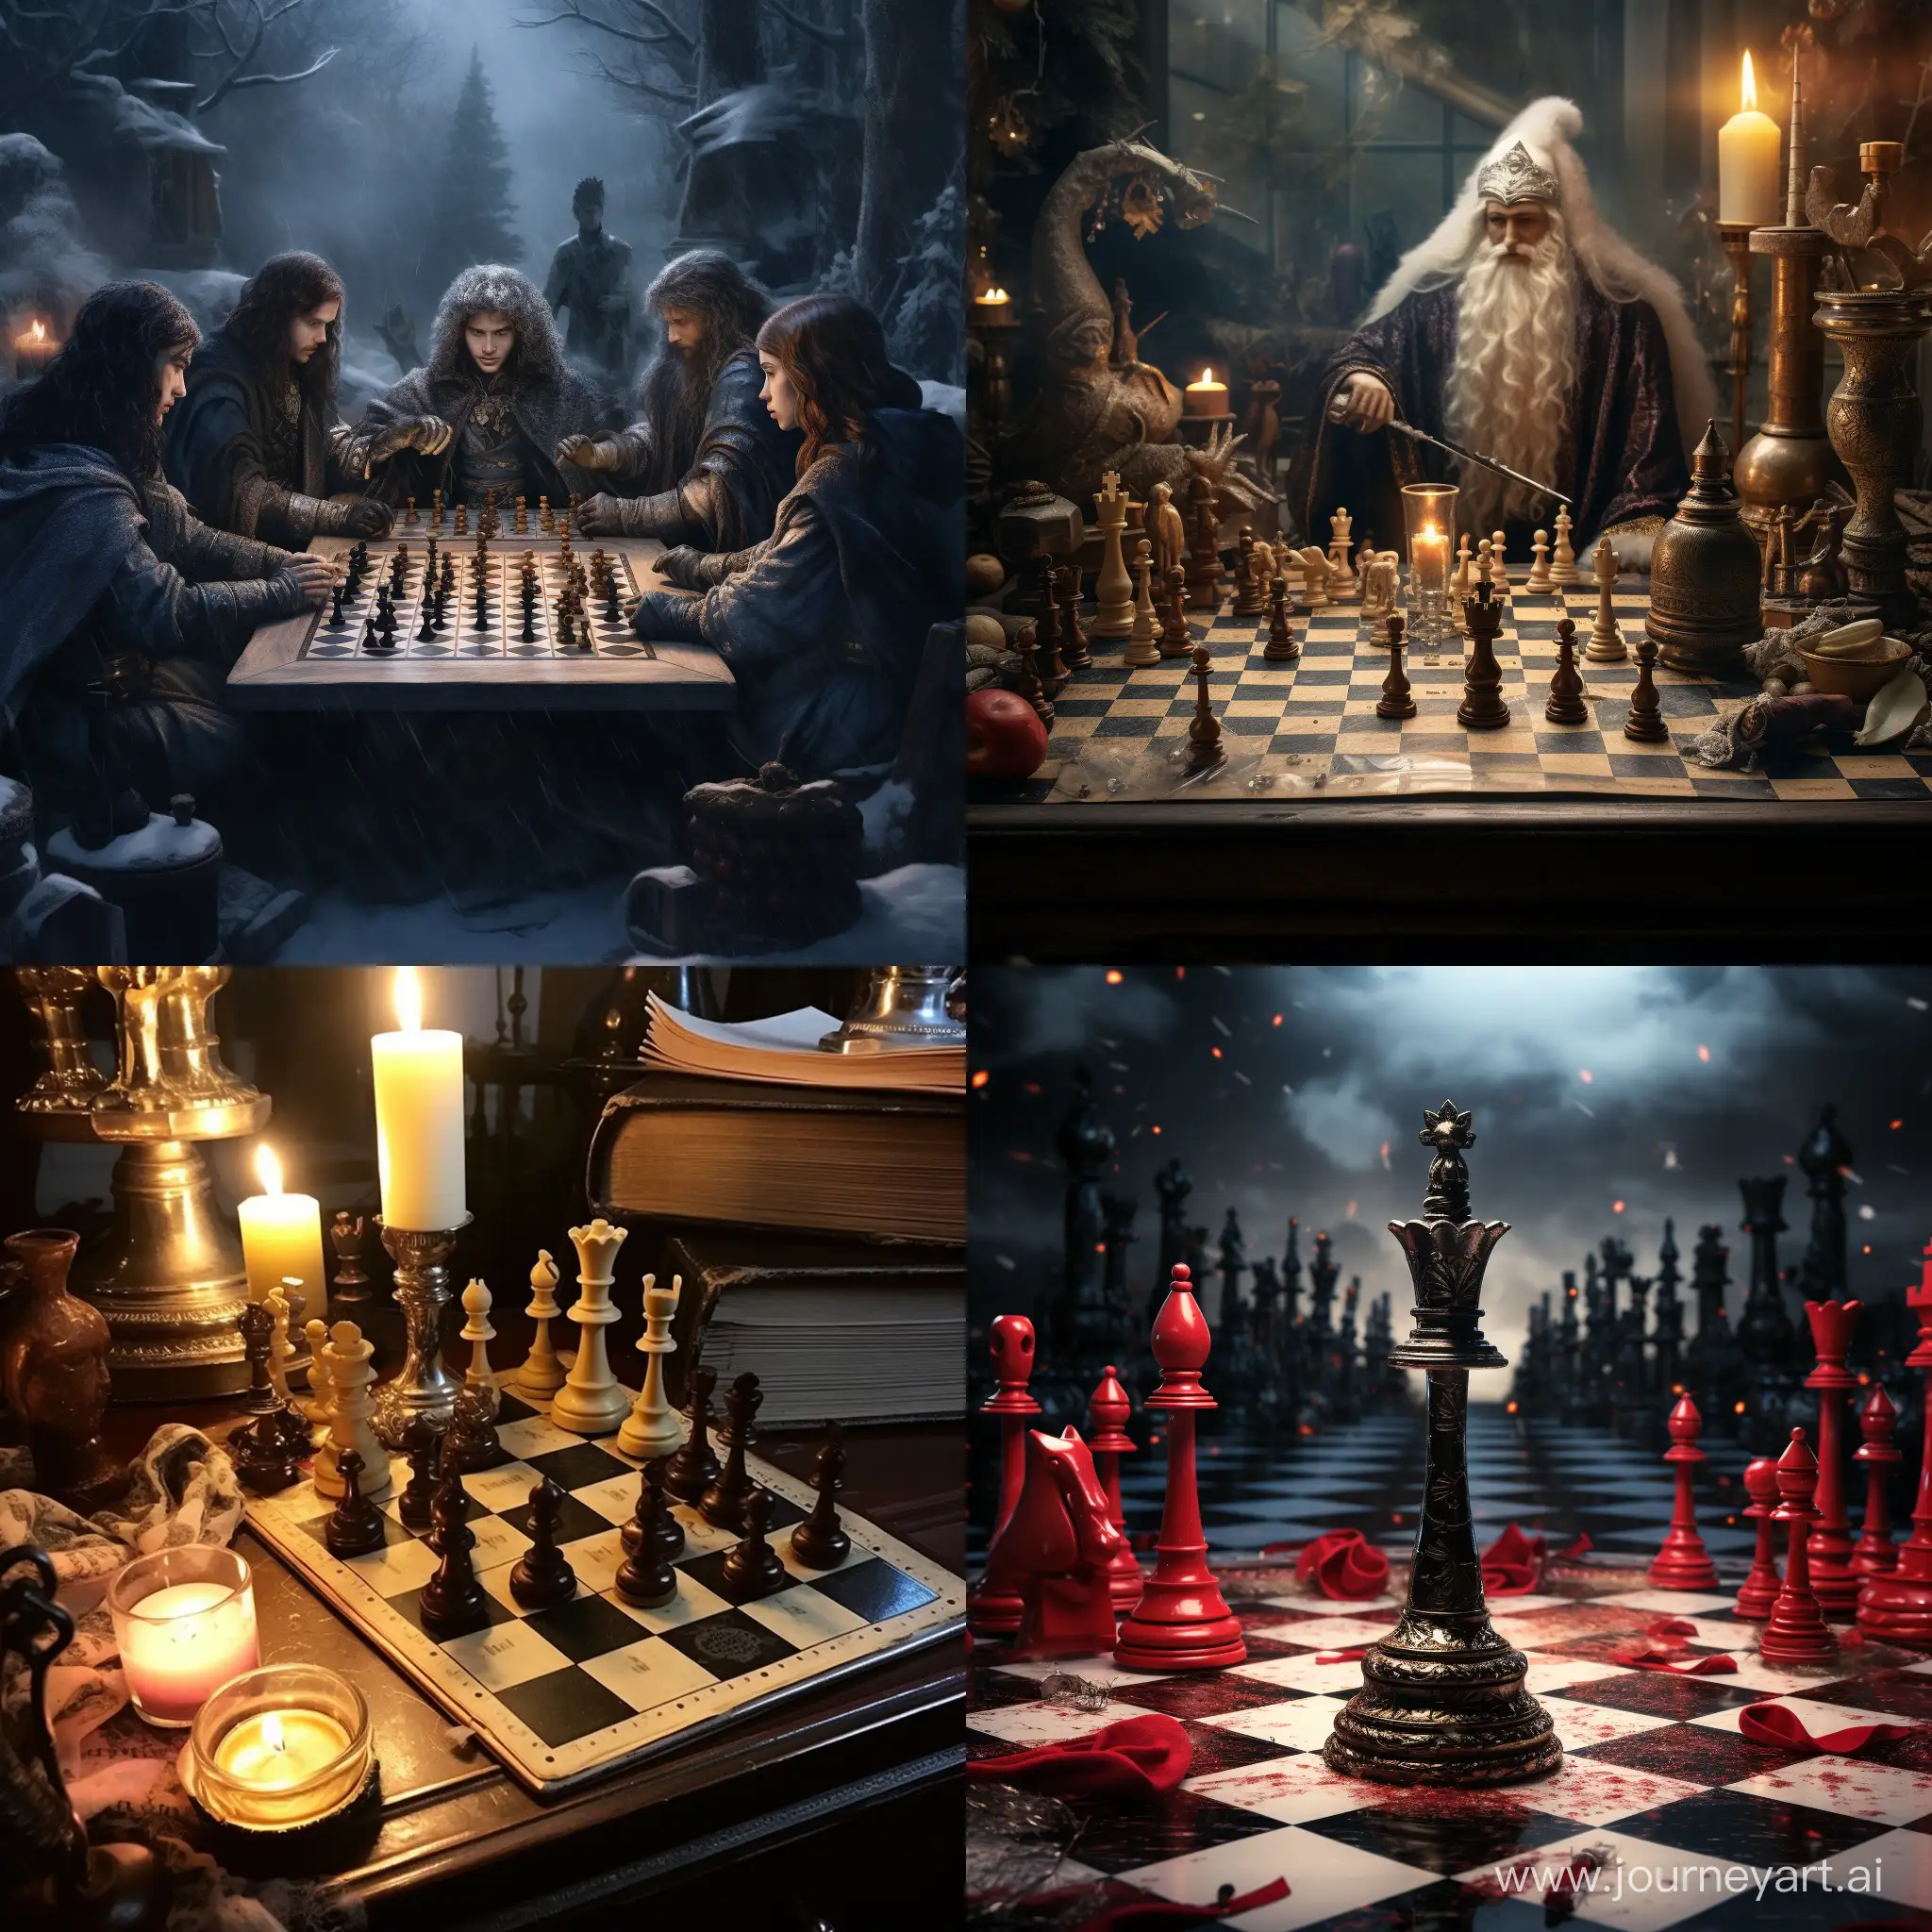 New-Years-Chess-Celebration-Intense-Battle-in-a-11-Arena-Image-54457